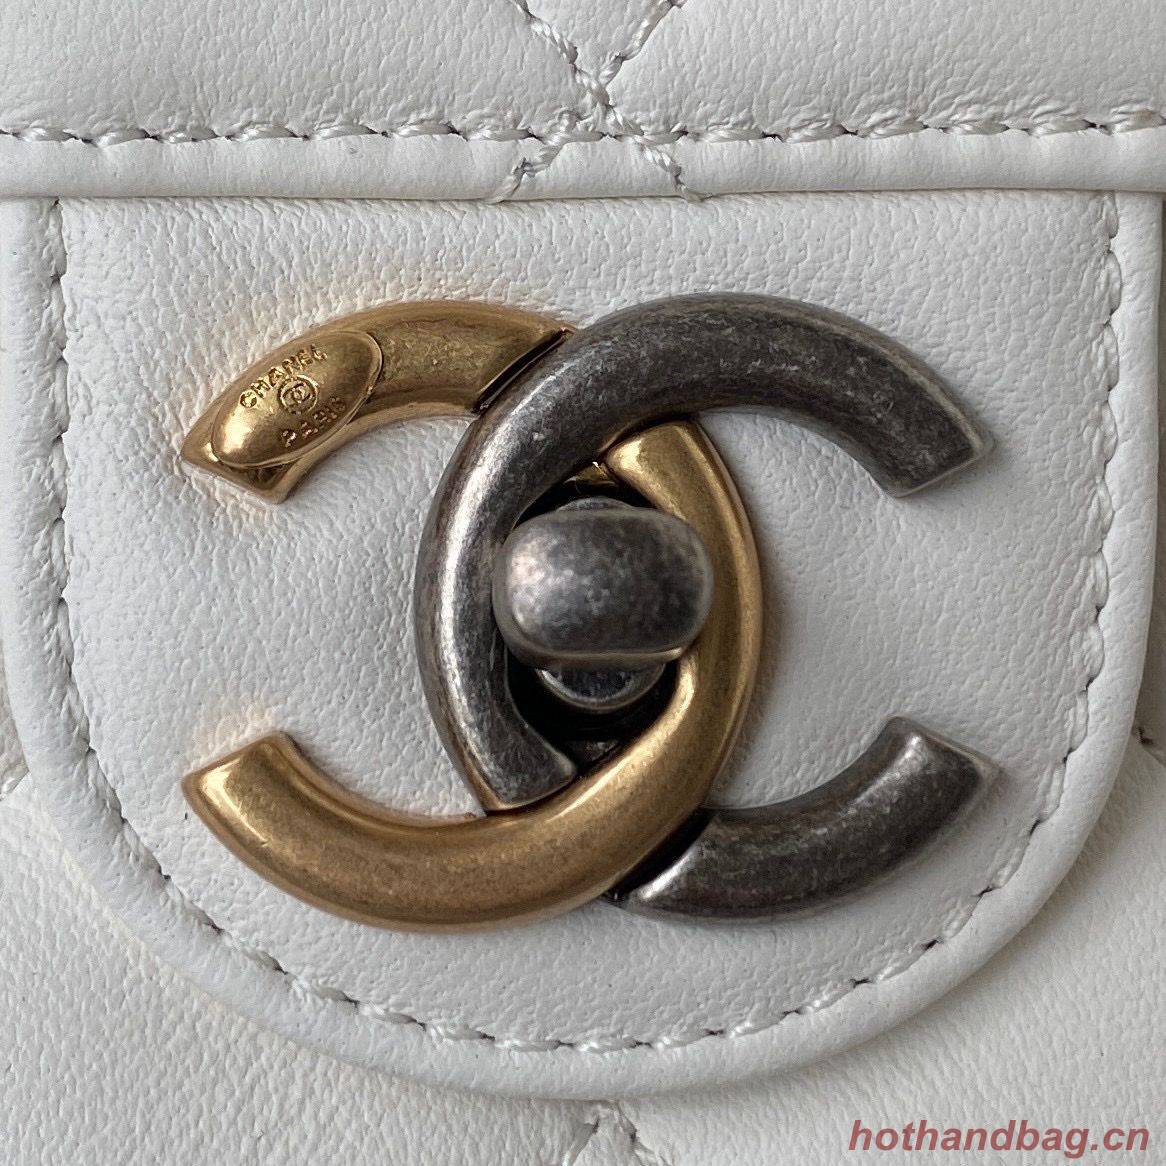 Chanel Original Leather Pearl Hairpin Badge Bag AS2979 White